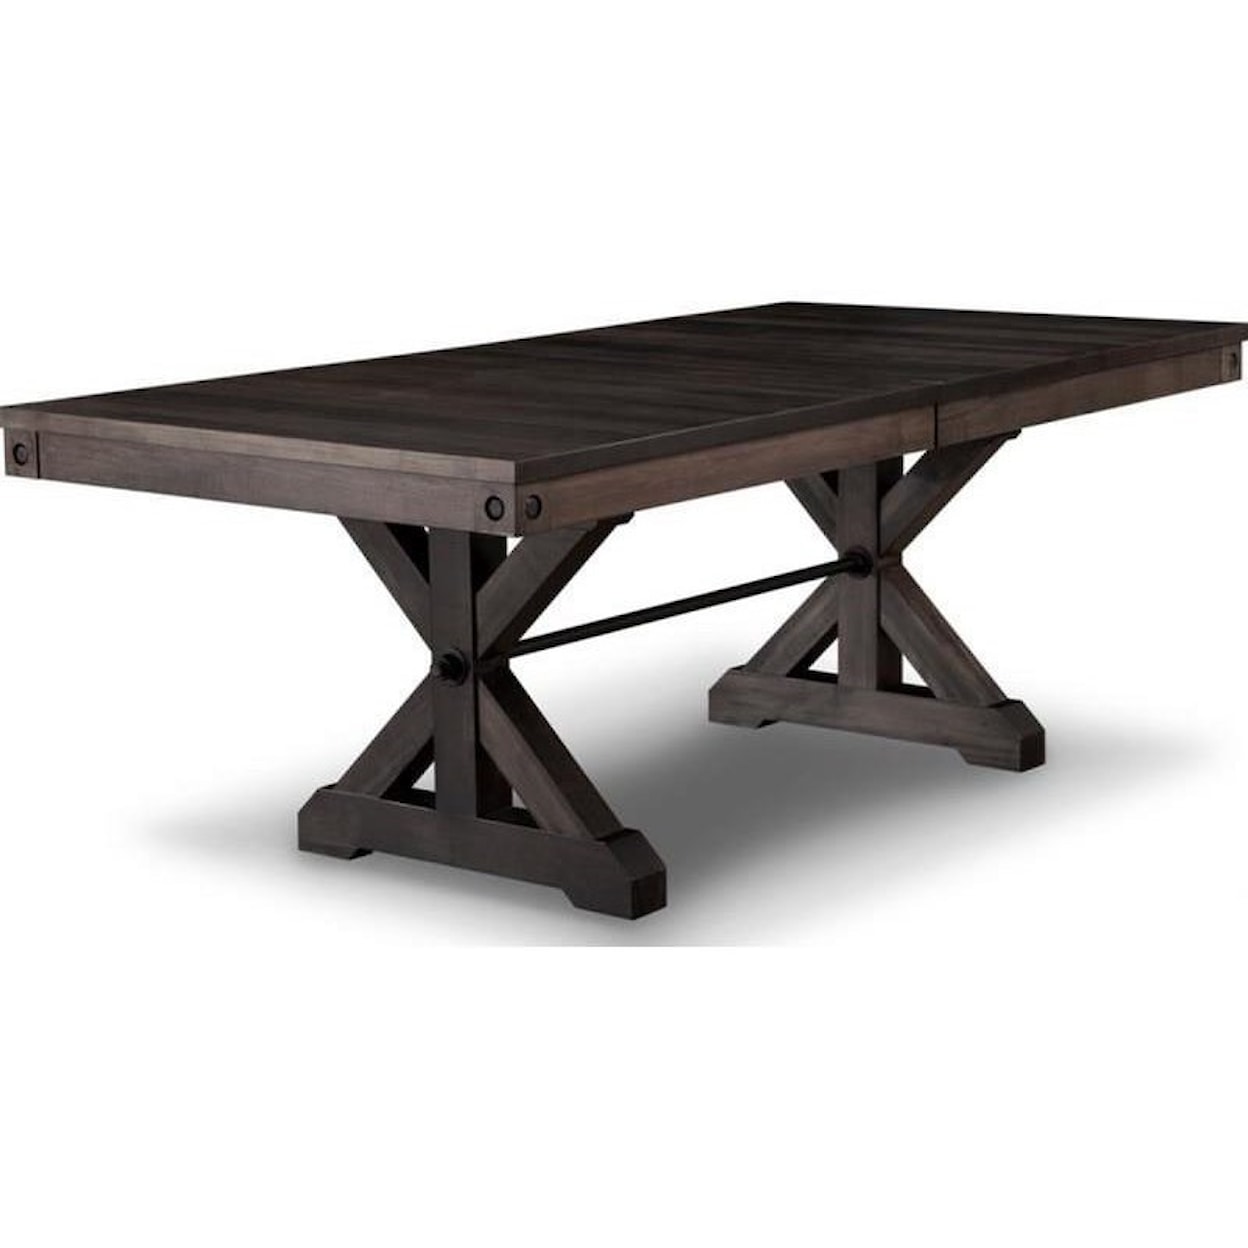 Handstone Rafters 42x60 Trestle Table